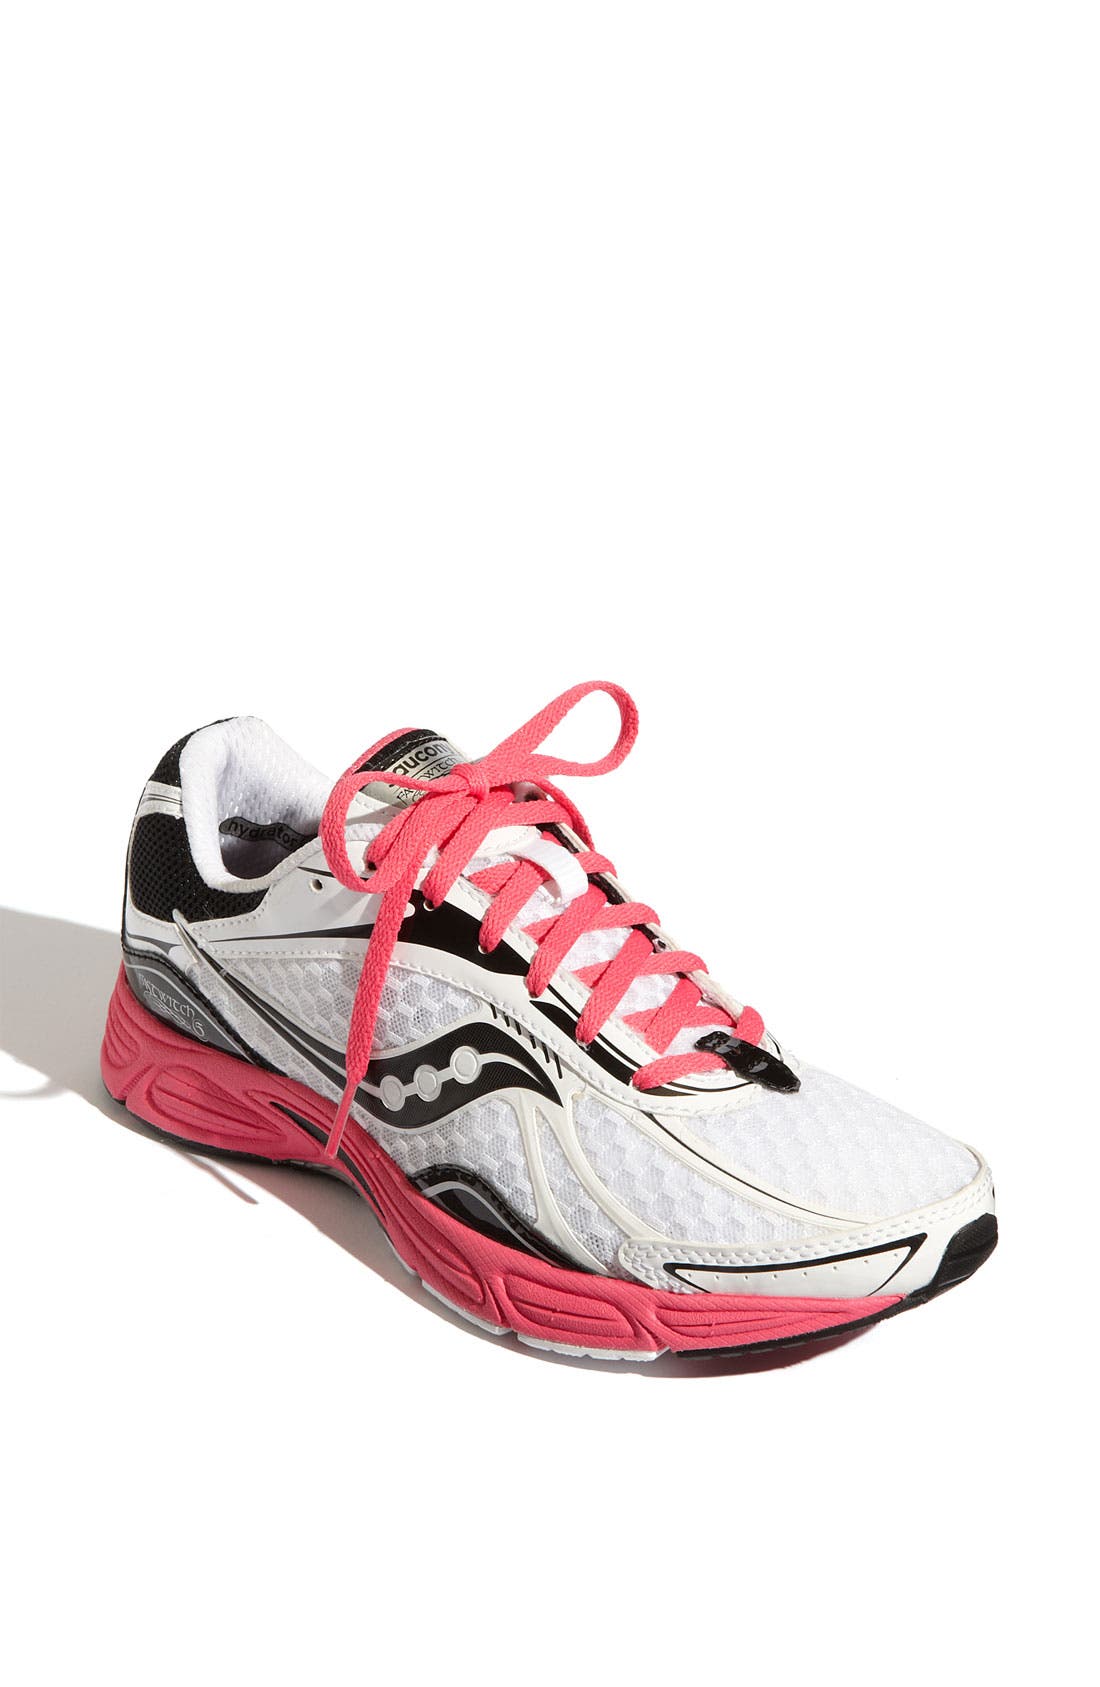 saucony grid fastwitch 5 womens running shoes